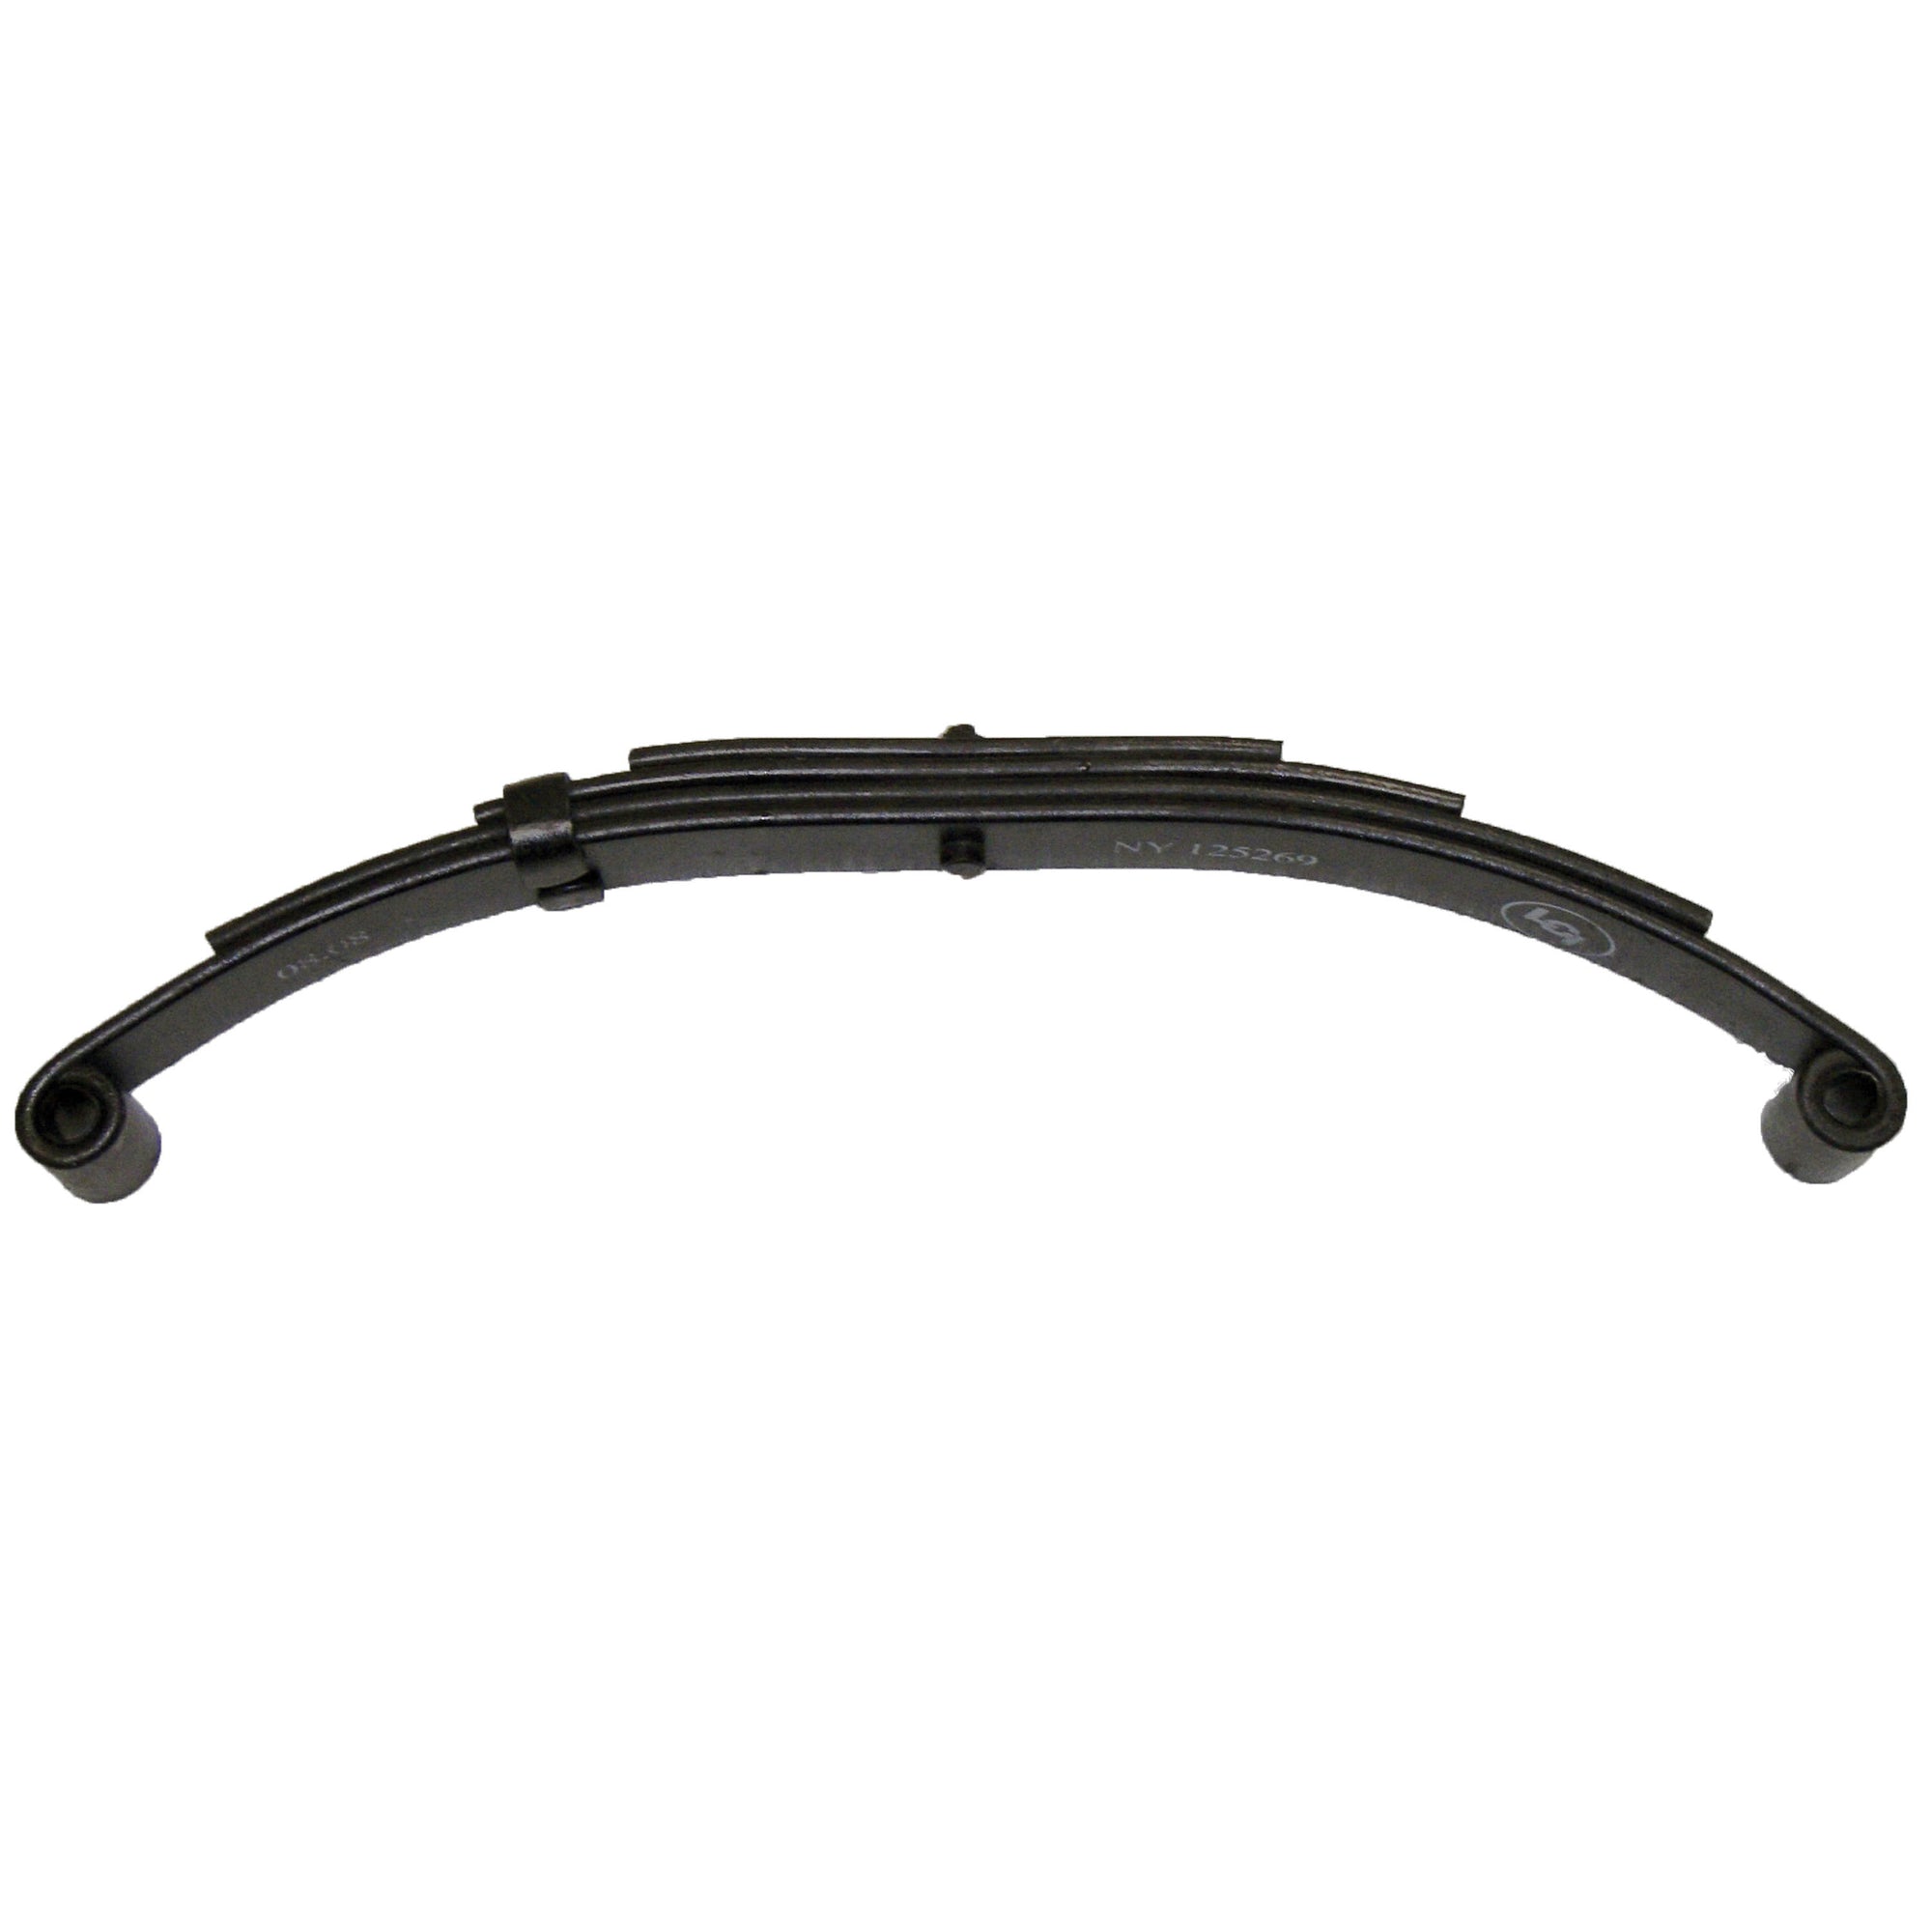 AP Products 014-133982 Axle Leaf Spring - 2500 lbs. 4 Leaves, 23-1/8"